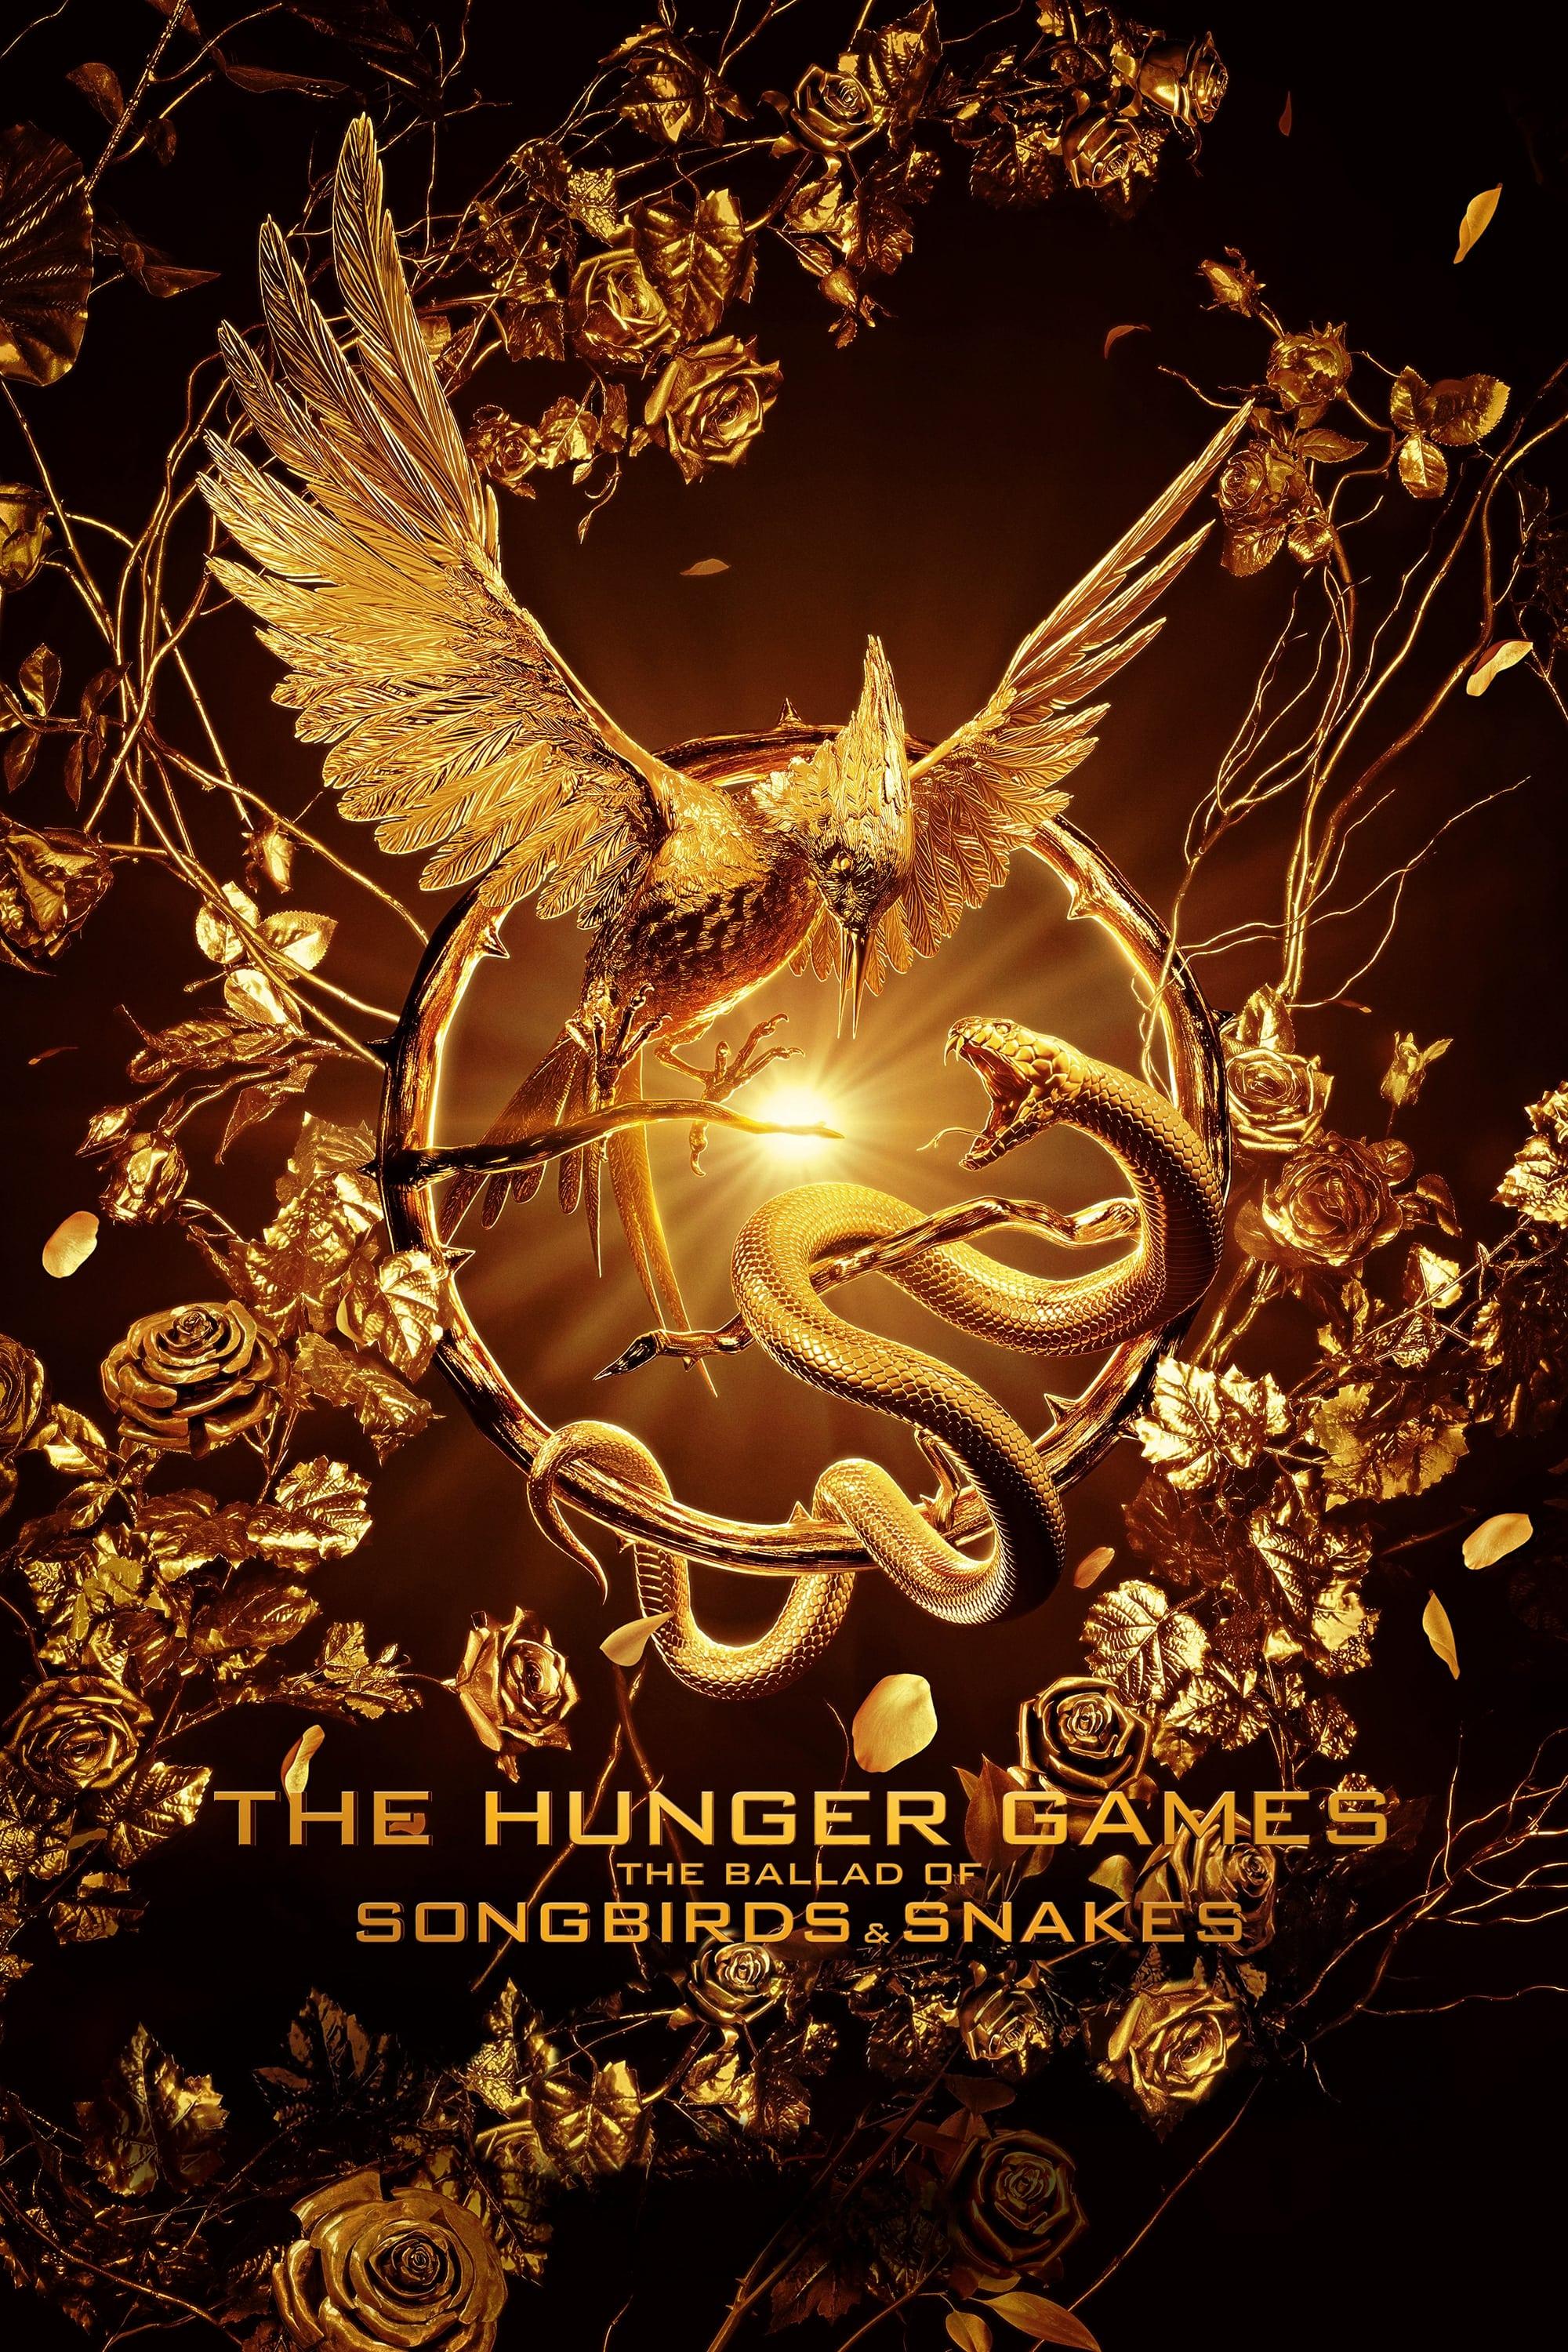 The Hunger Games: The Ballad of Songbirds & Snakes poster